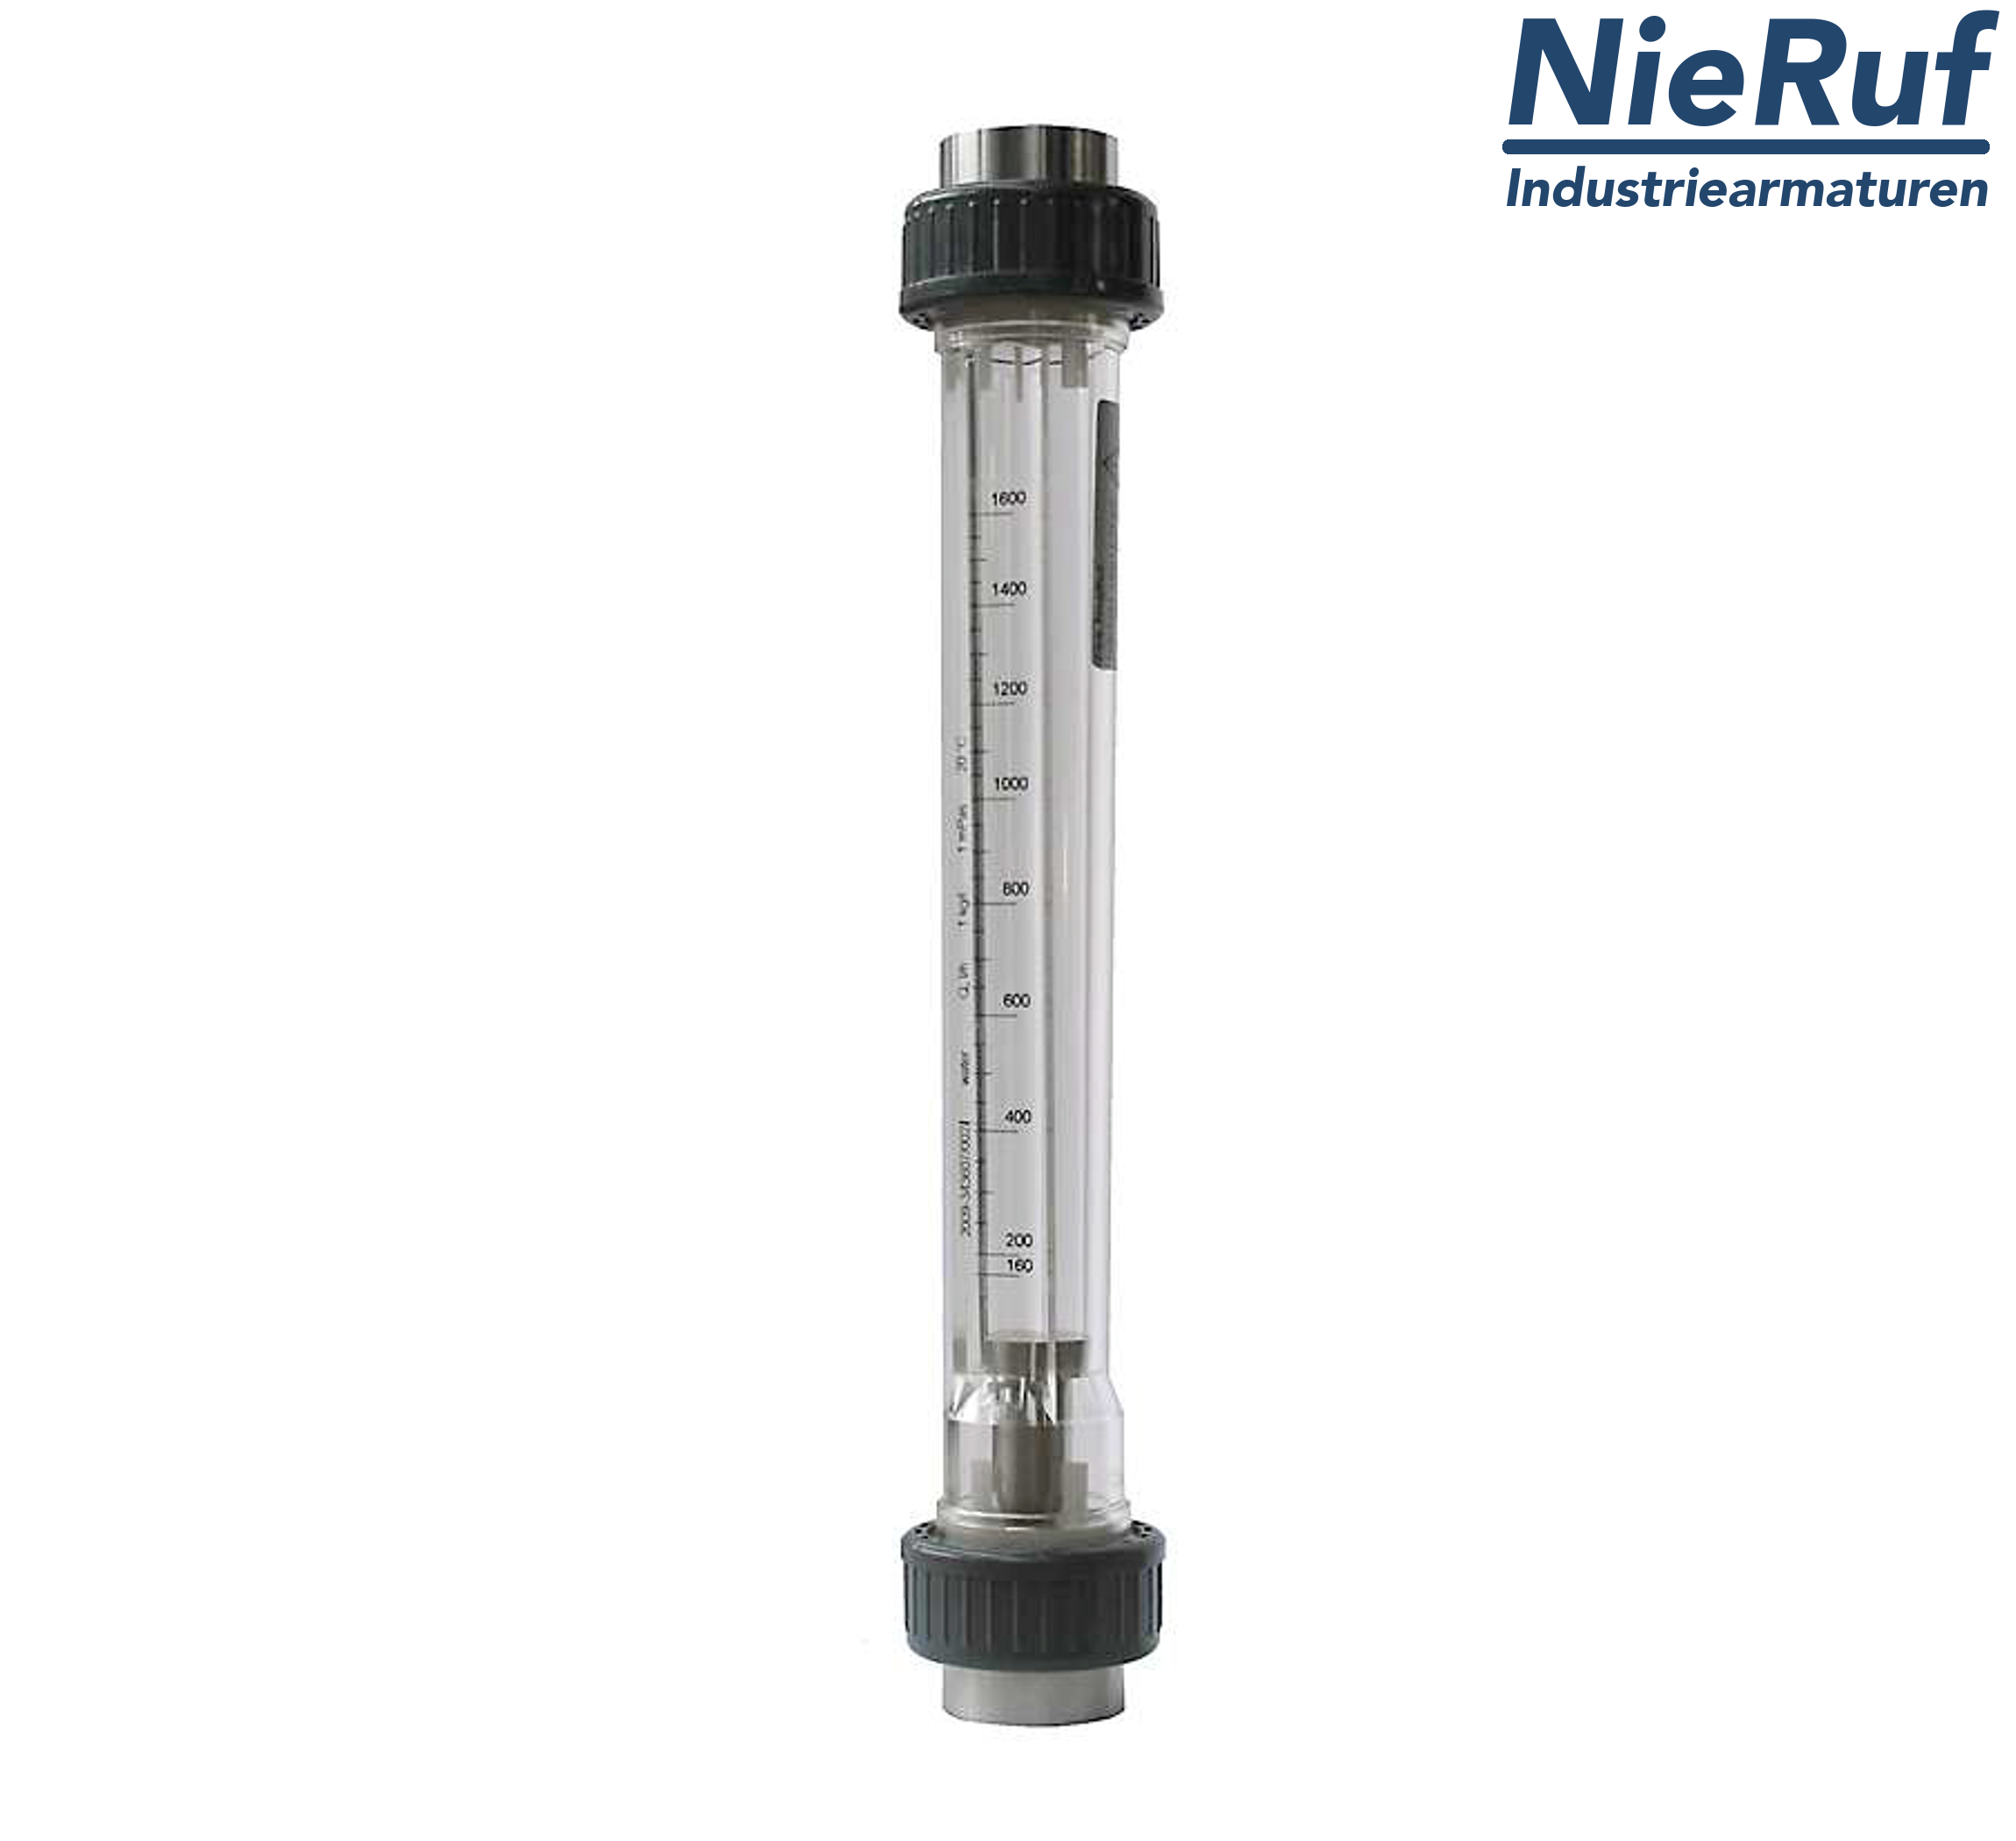 Variable area flowmeter 1 1/4" inch 400.0 - 4000 l/h water NBR